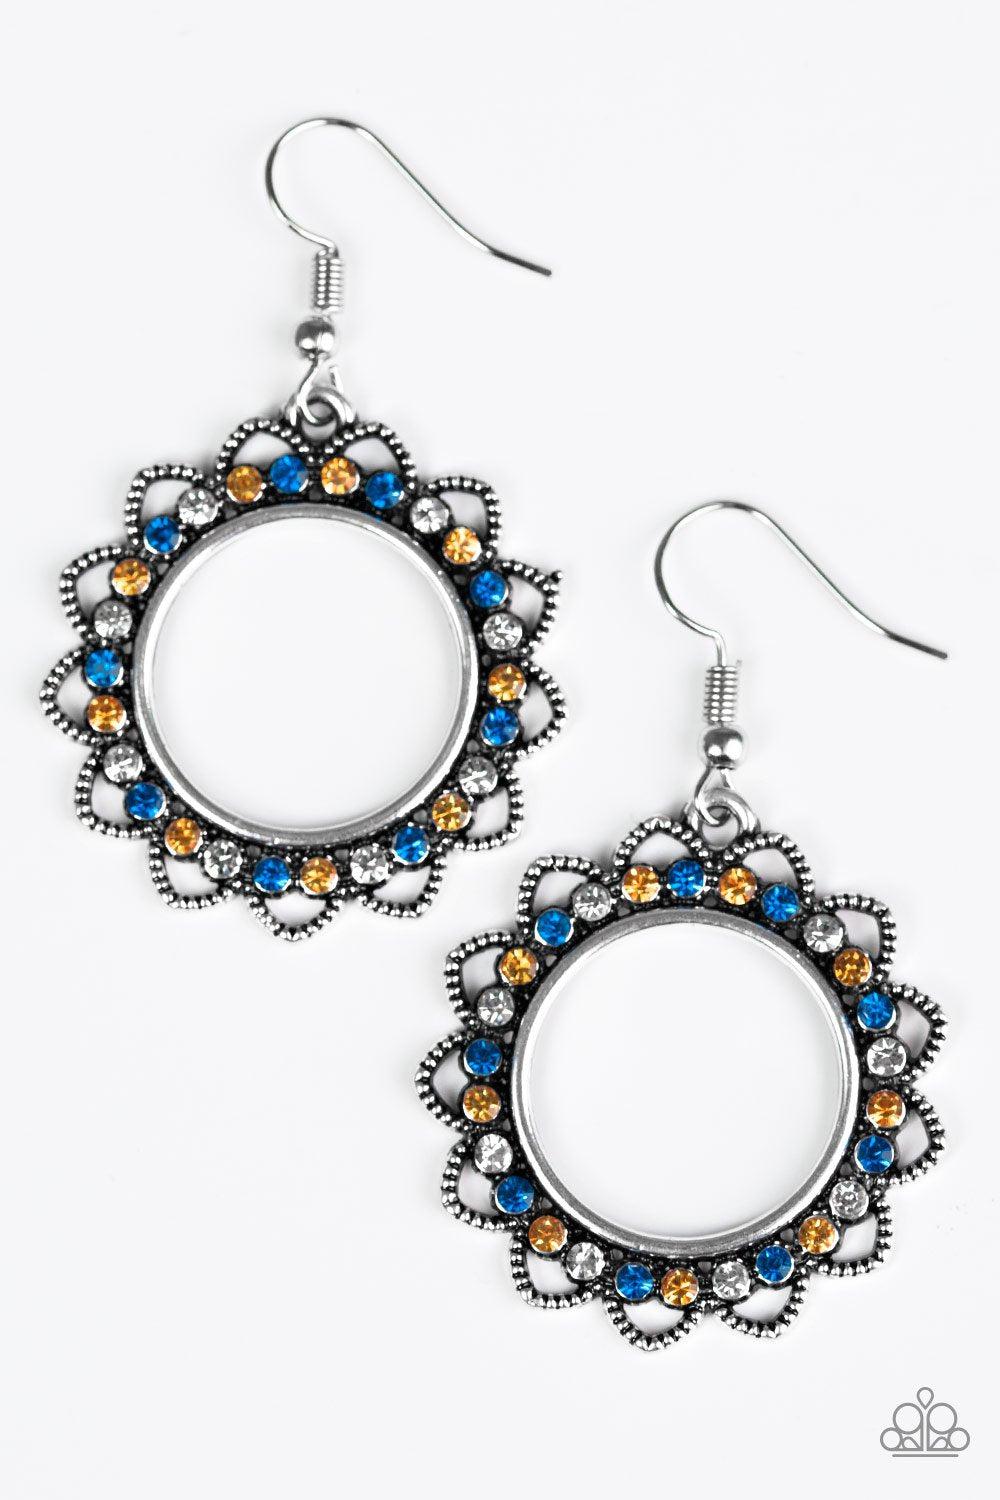 Bring Your Tambourine Multi - Blue and Orange Rhinestone Earrings - Paparazzi Accessories-CarasShop.com - $5 Jewelry by Cara Jewels